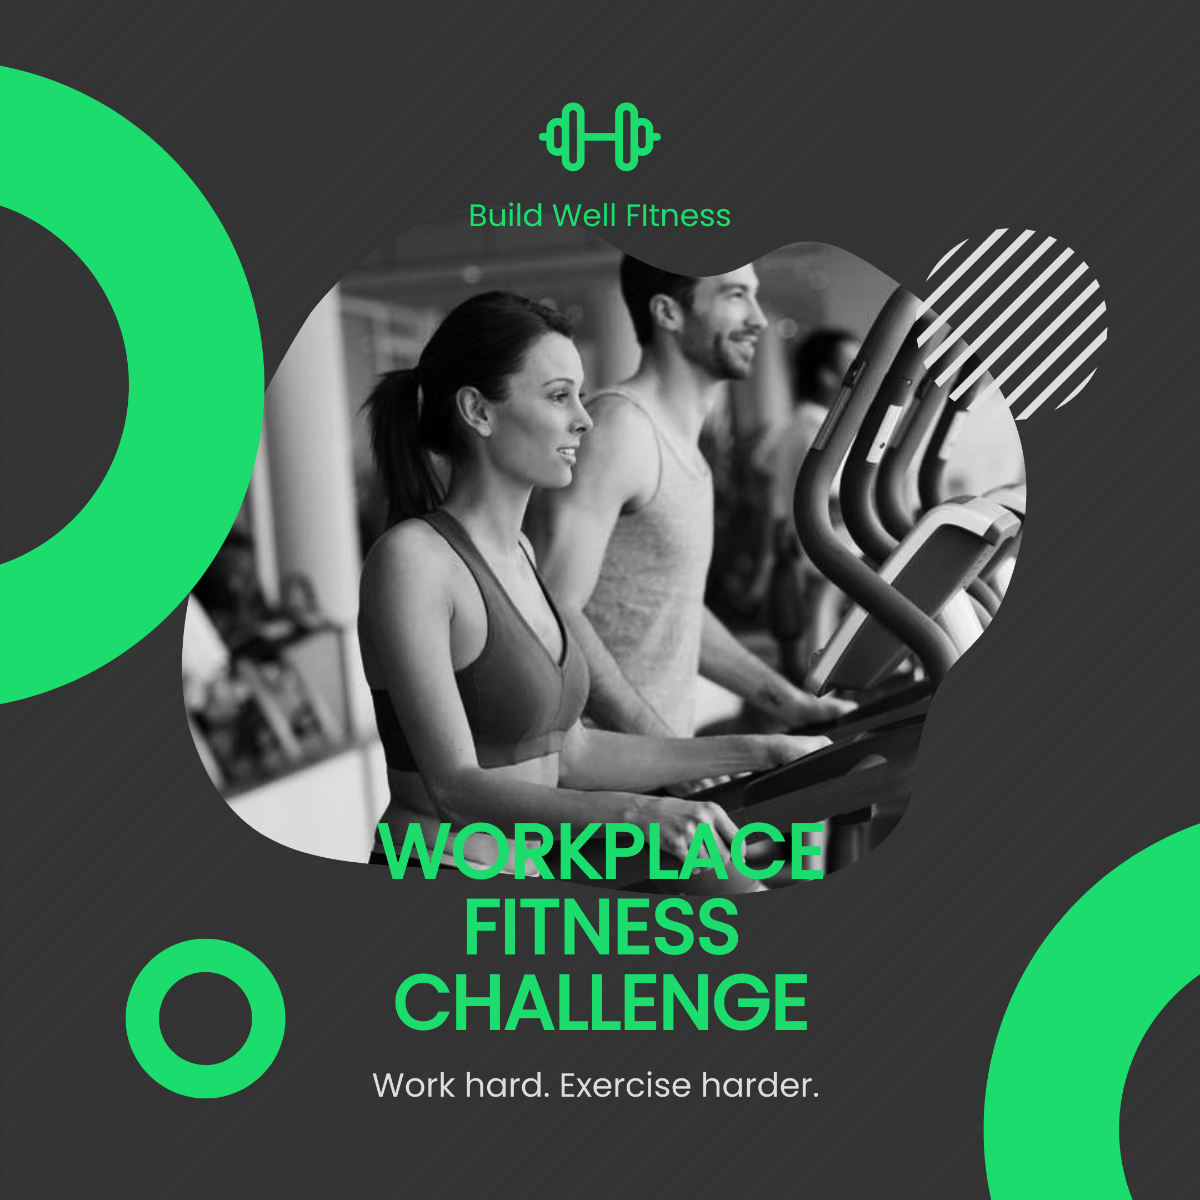 Free Workplace Fitness Challenge Post, Instagram, Facebook Template